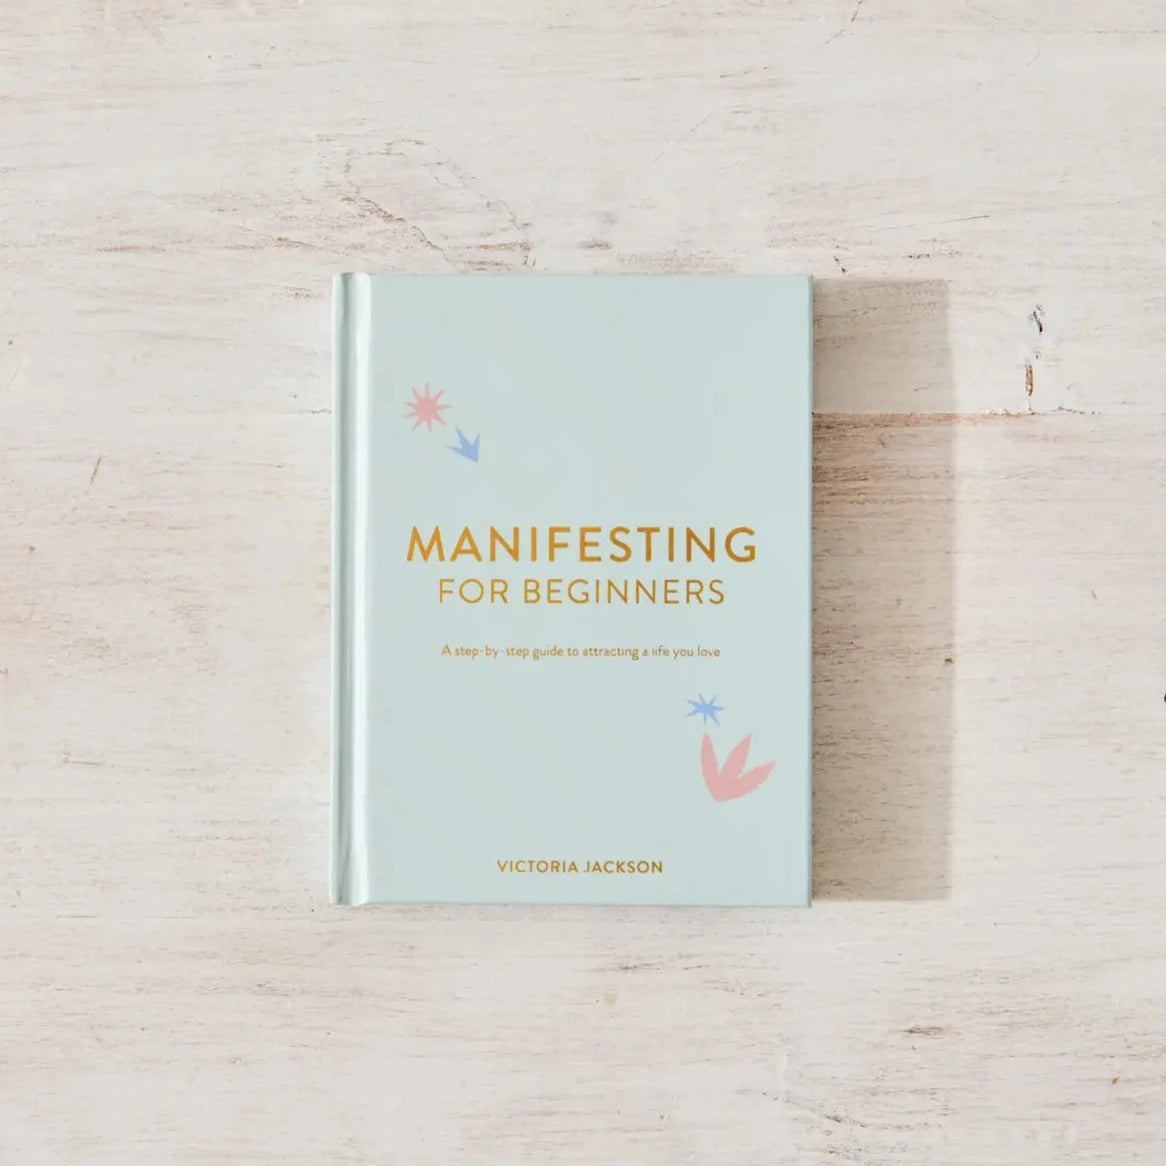 Light blue cover with dark yellow text that reads &quot;Manifesting for beginners&quot;. Has small pastel pink and blue illustrations on the top left and bottom right of the cover text